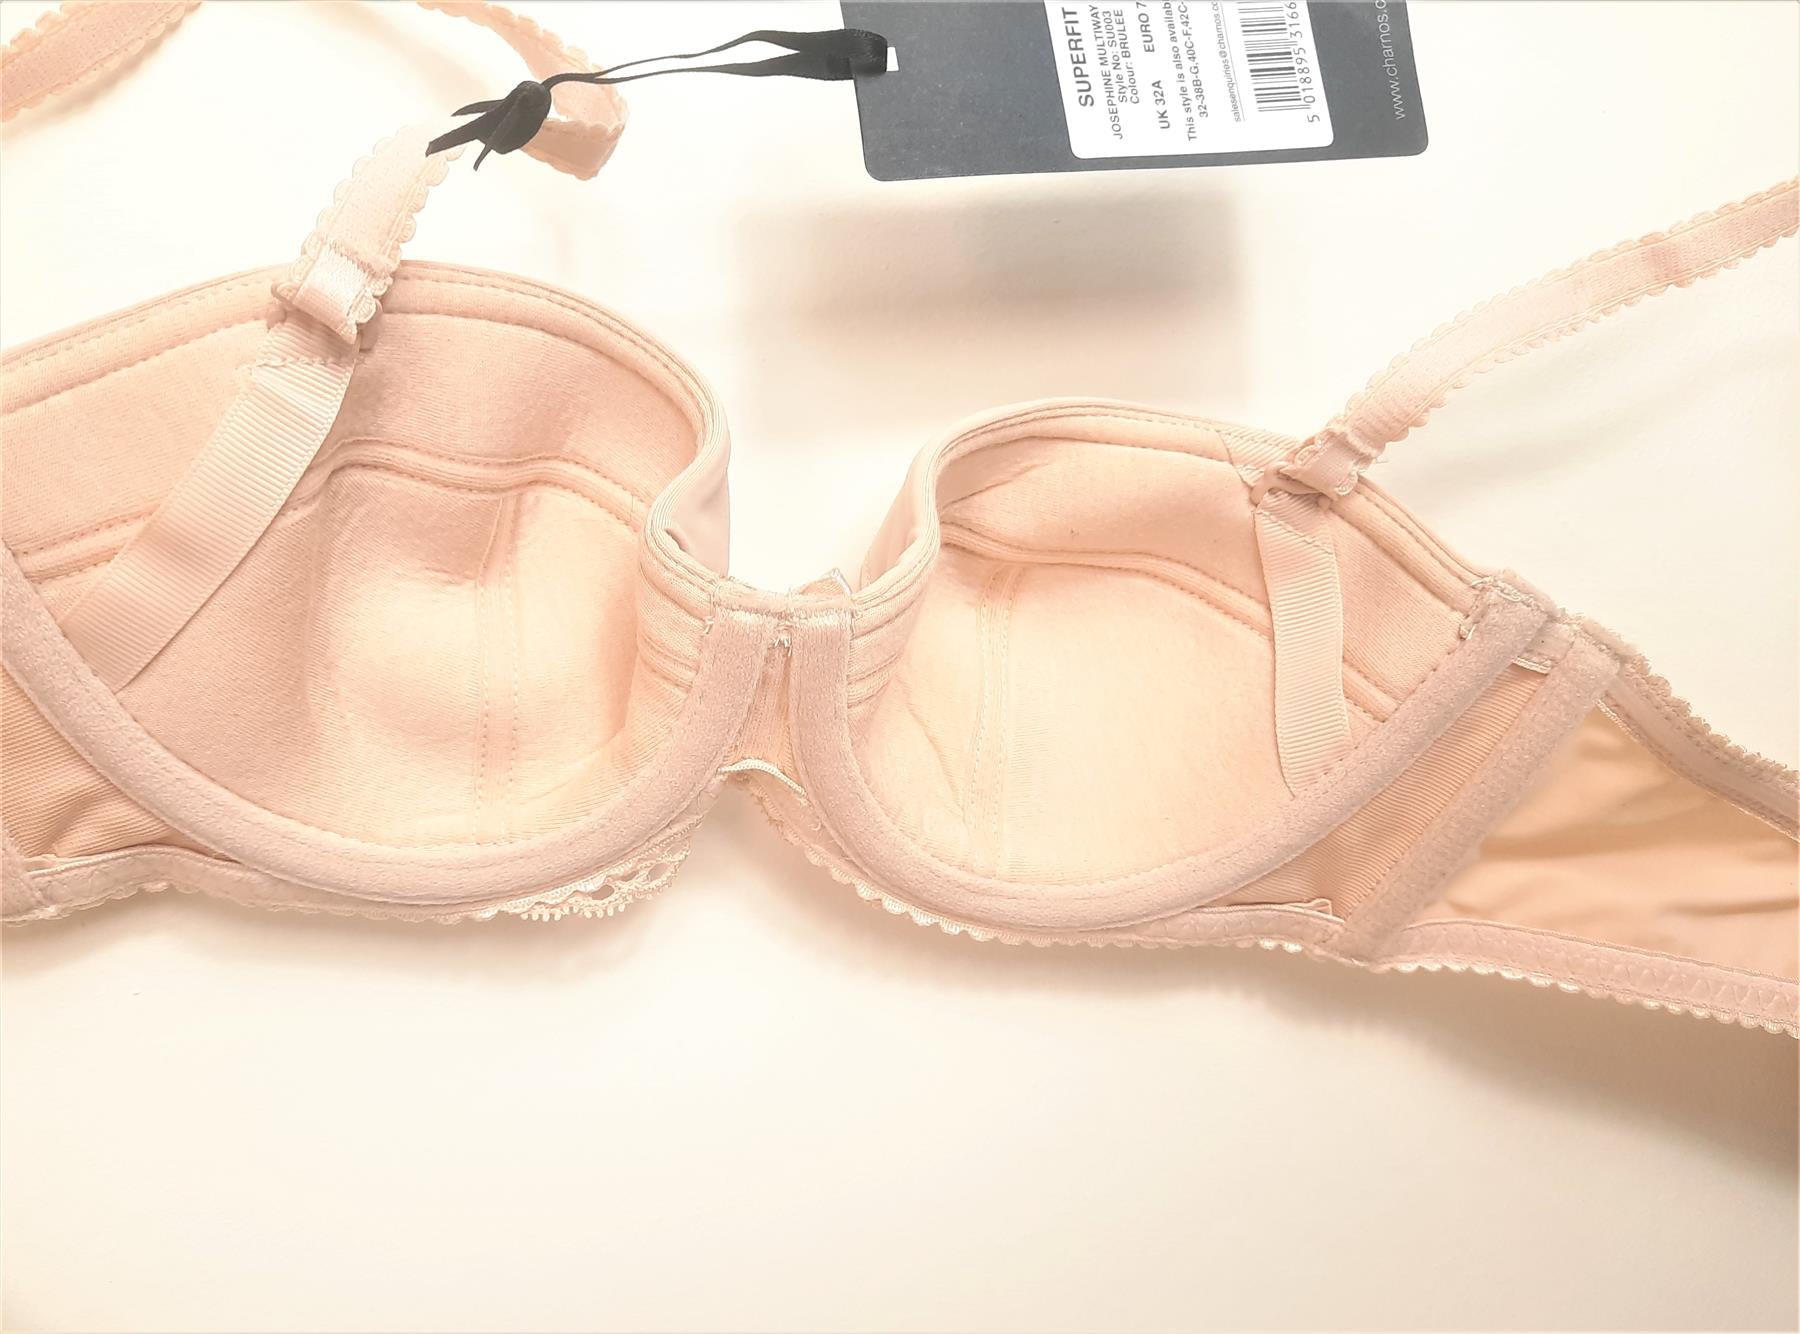 32A Bra Charnos Superfit Multiway Underwired Light Padded Balcony Almond New